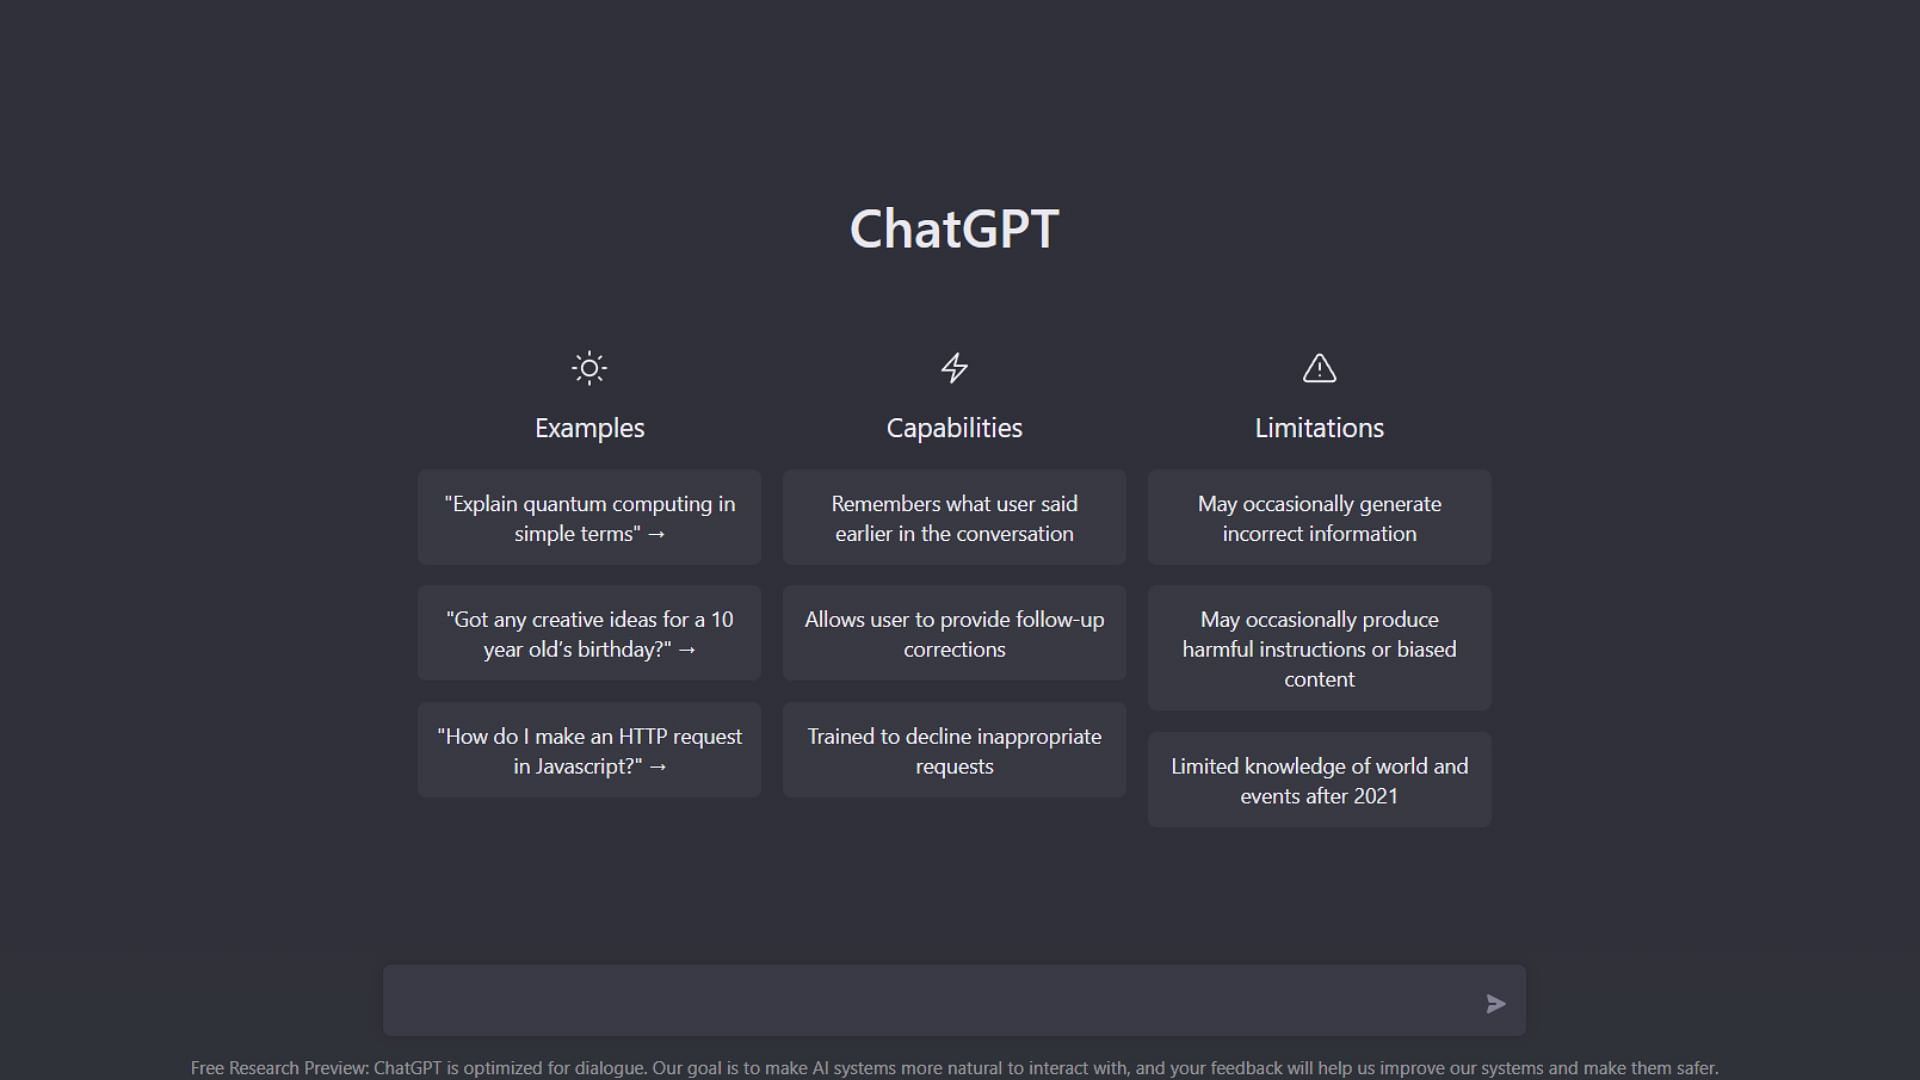 Be Part of the Ultimate Adult Chat Revolution with ChatGPT